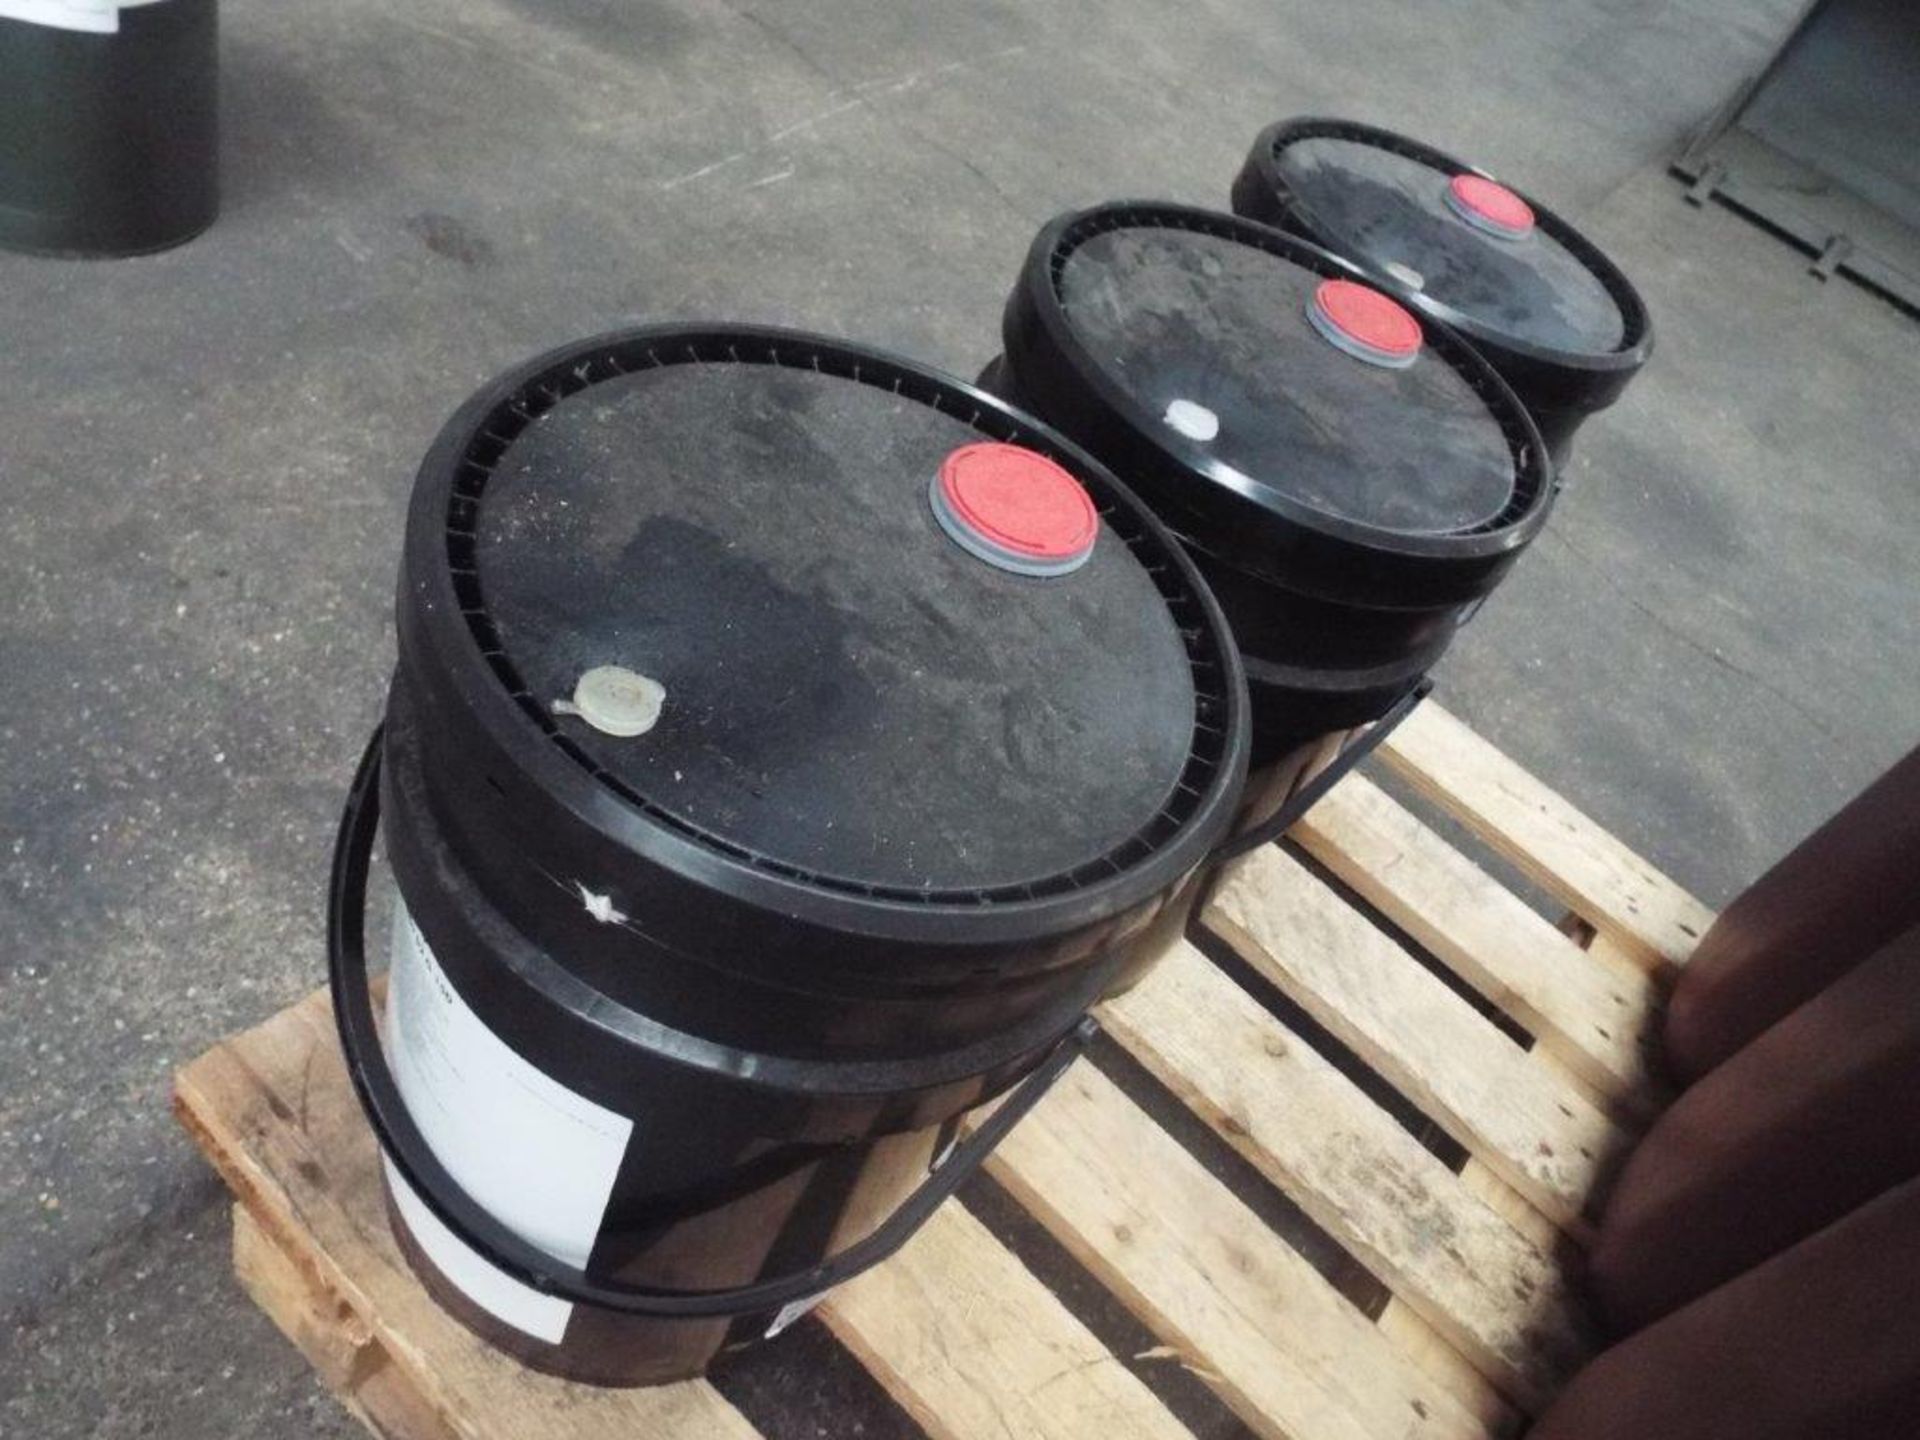 3 x Unissued 20L Drums of Shell Omala S2G 150 Industrial Gear and Bearing Oil